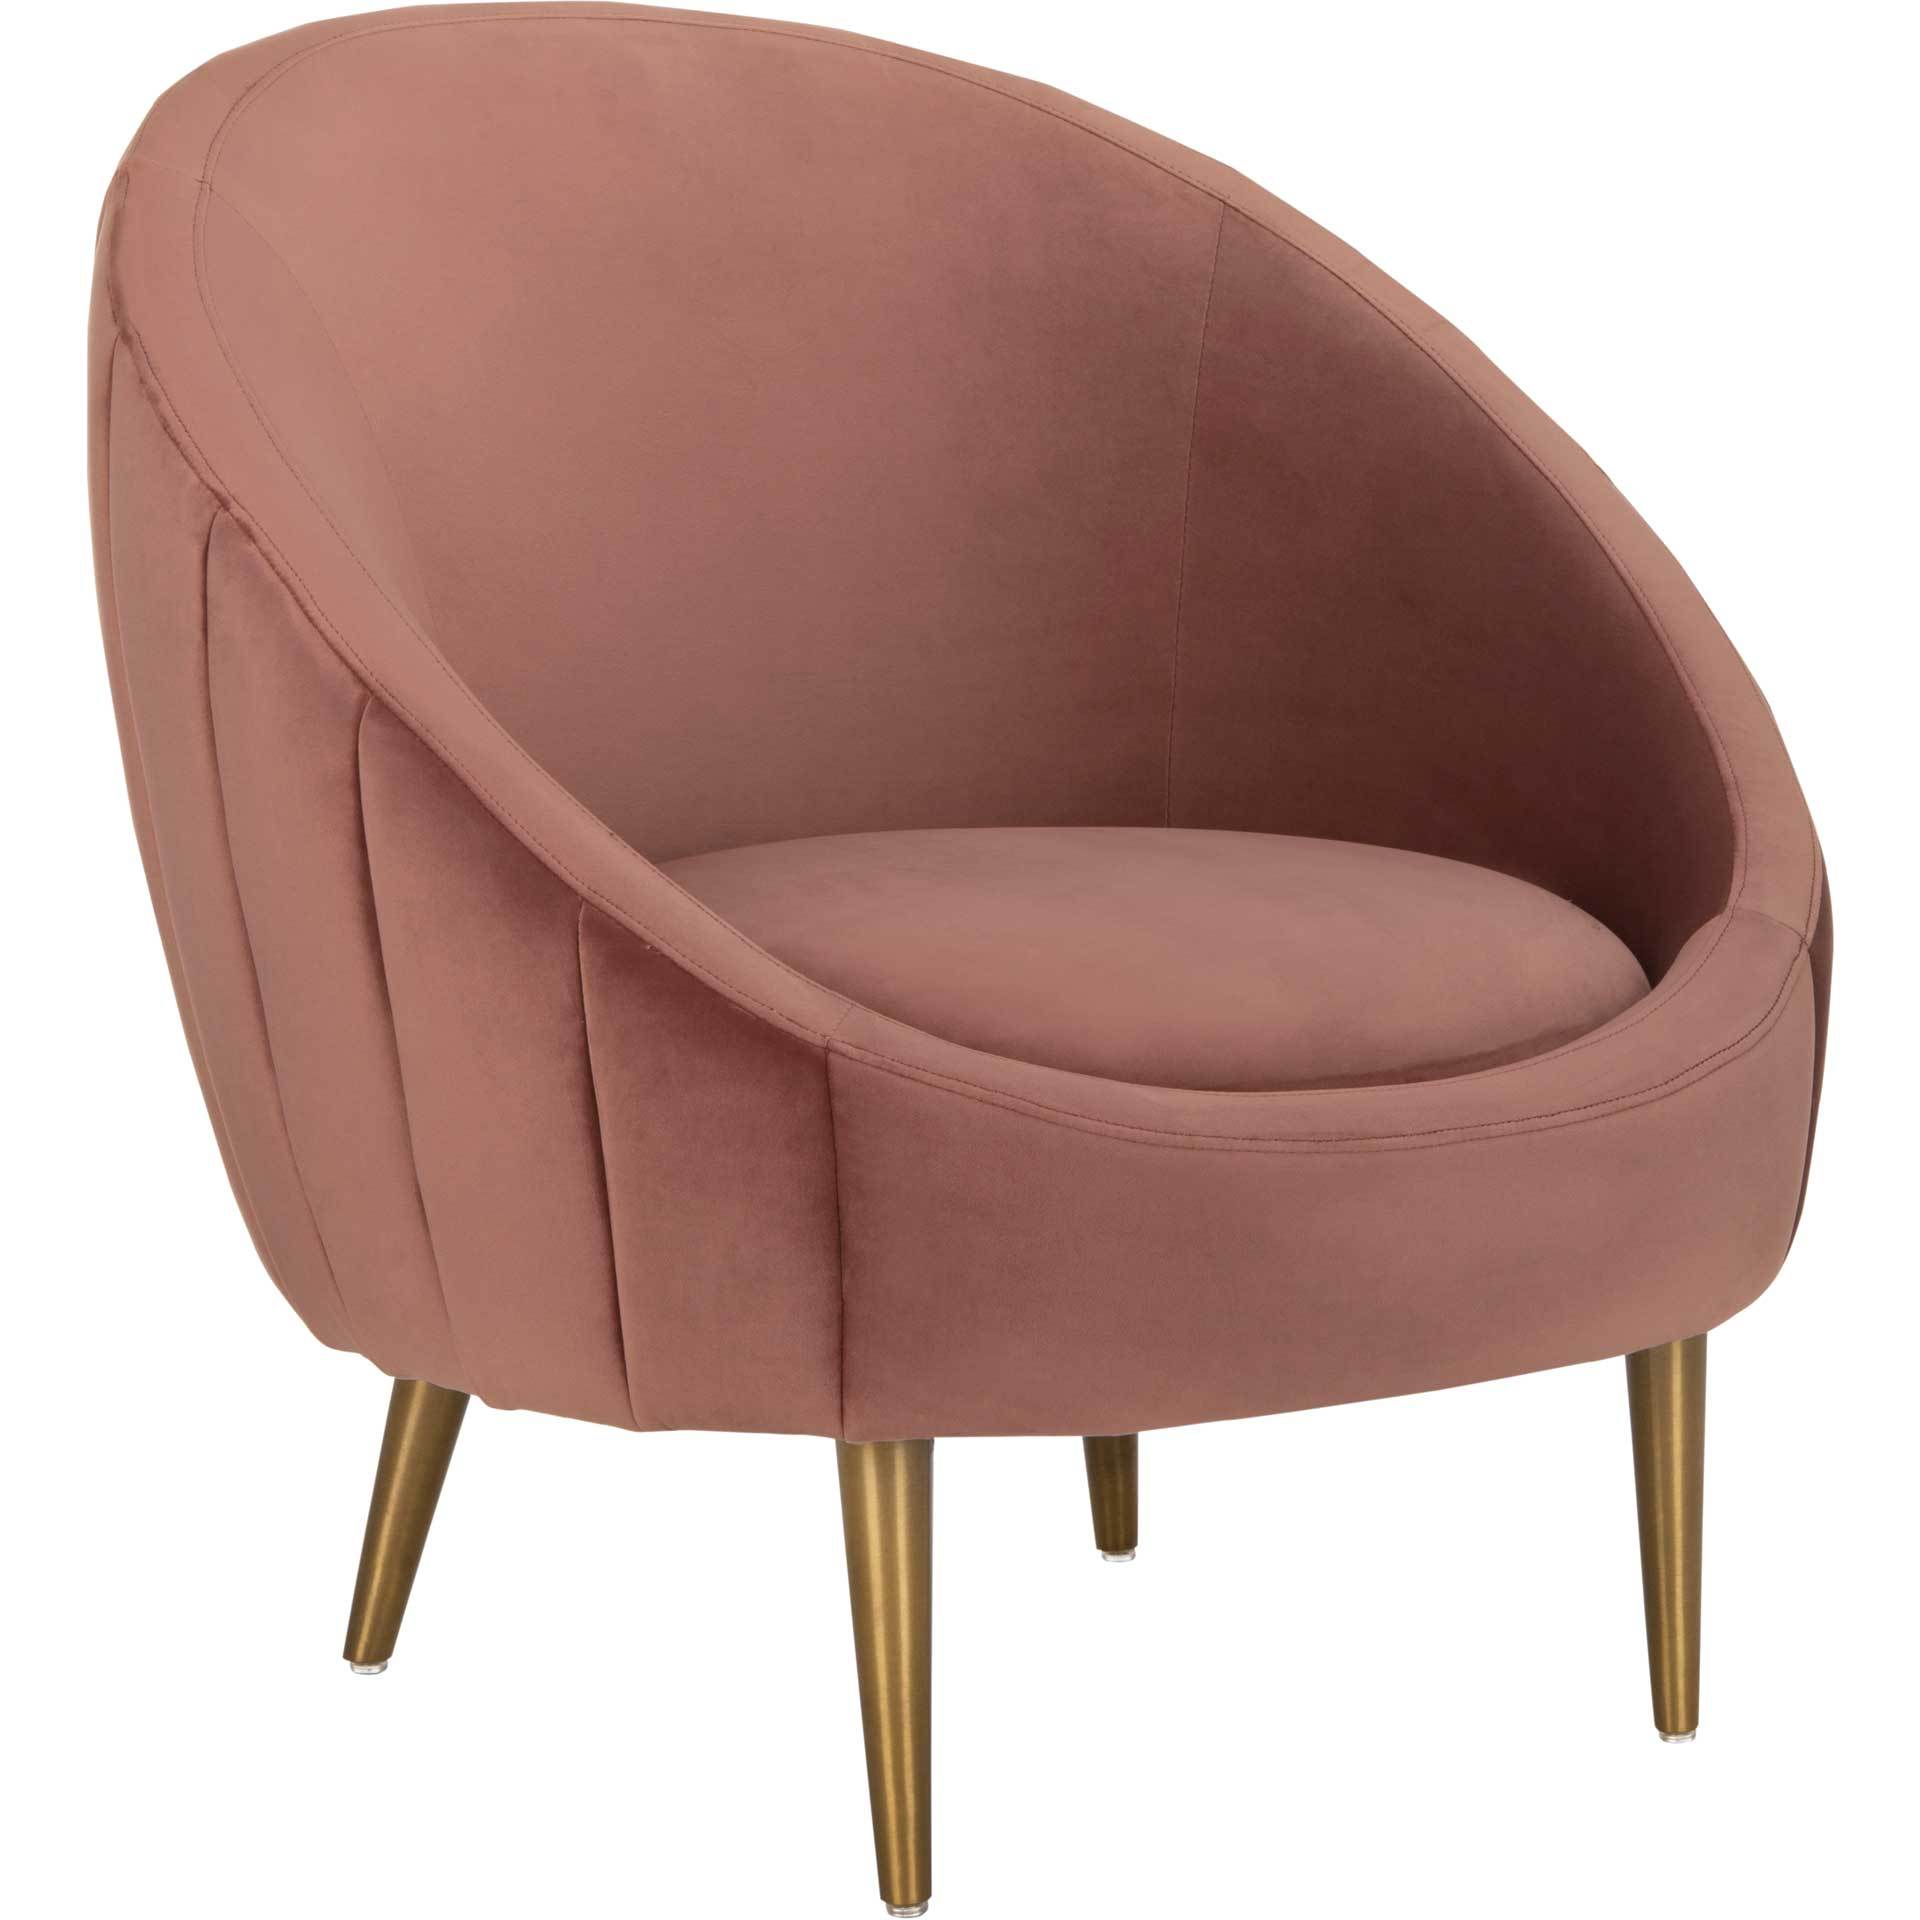 Raymond Channel Tufted Tub Chair Dusty Rose/Gold